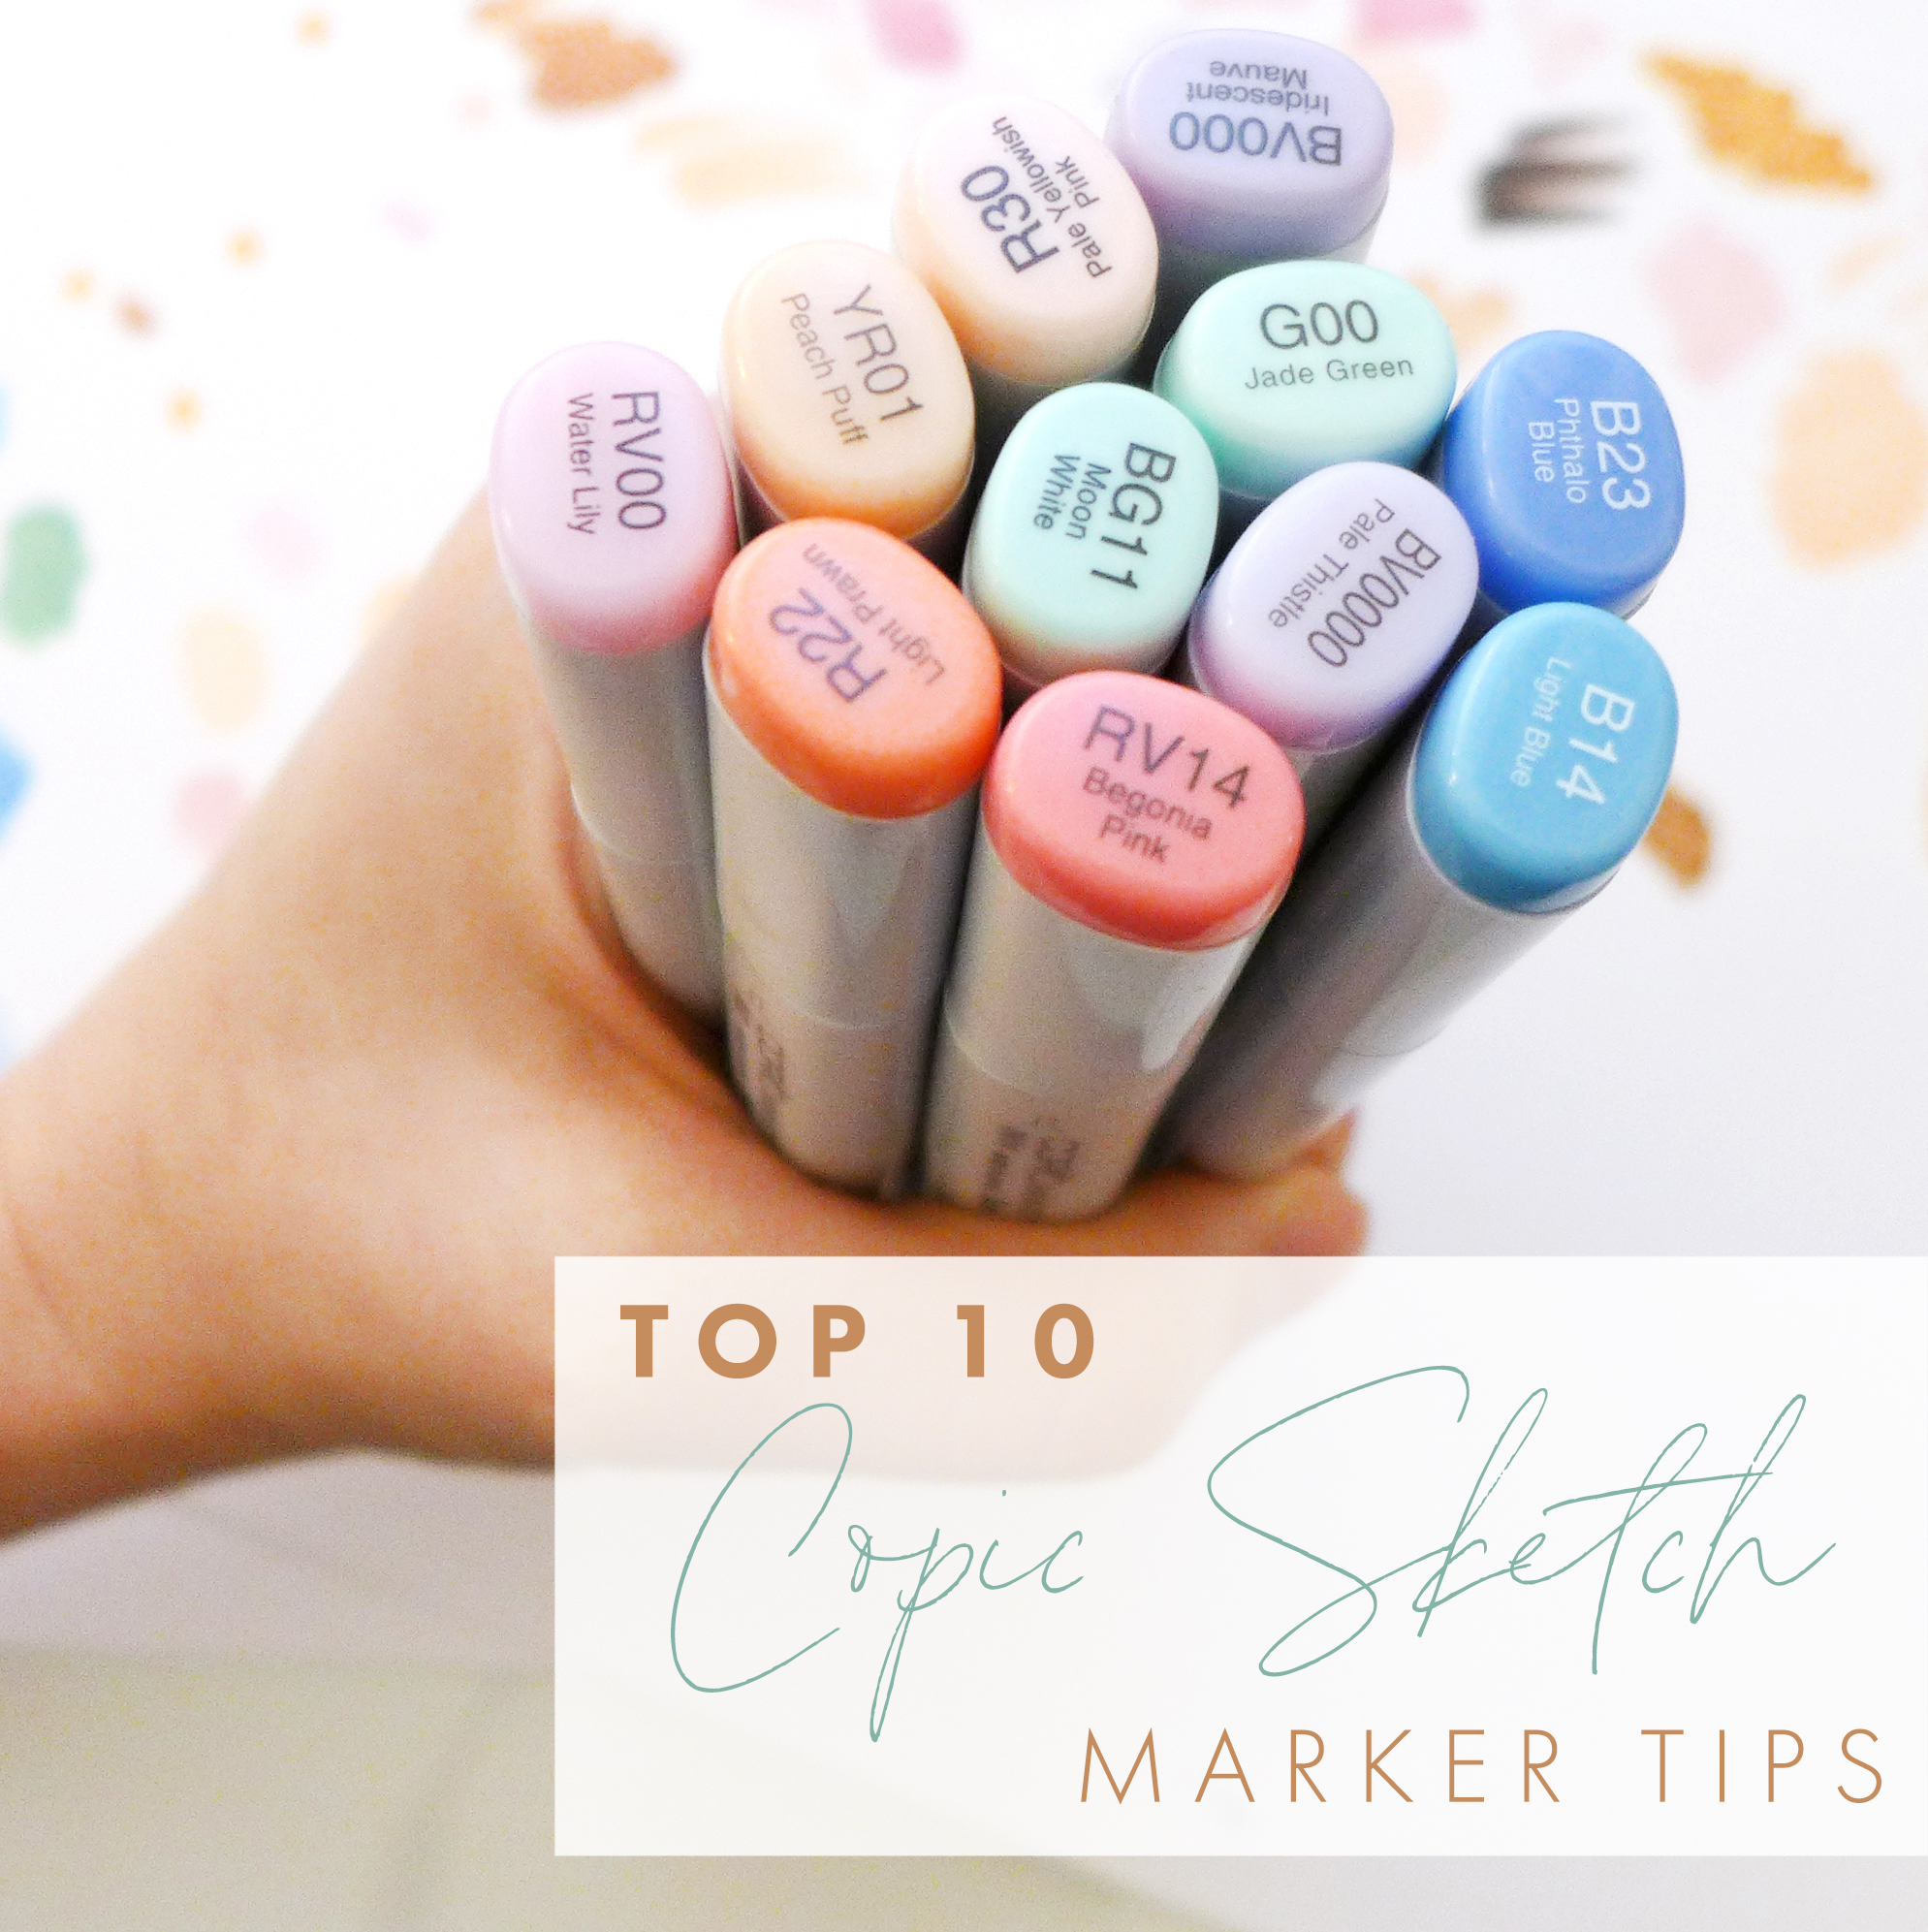 My Top 10 Copic Sketch Marker Tips…